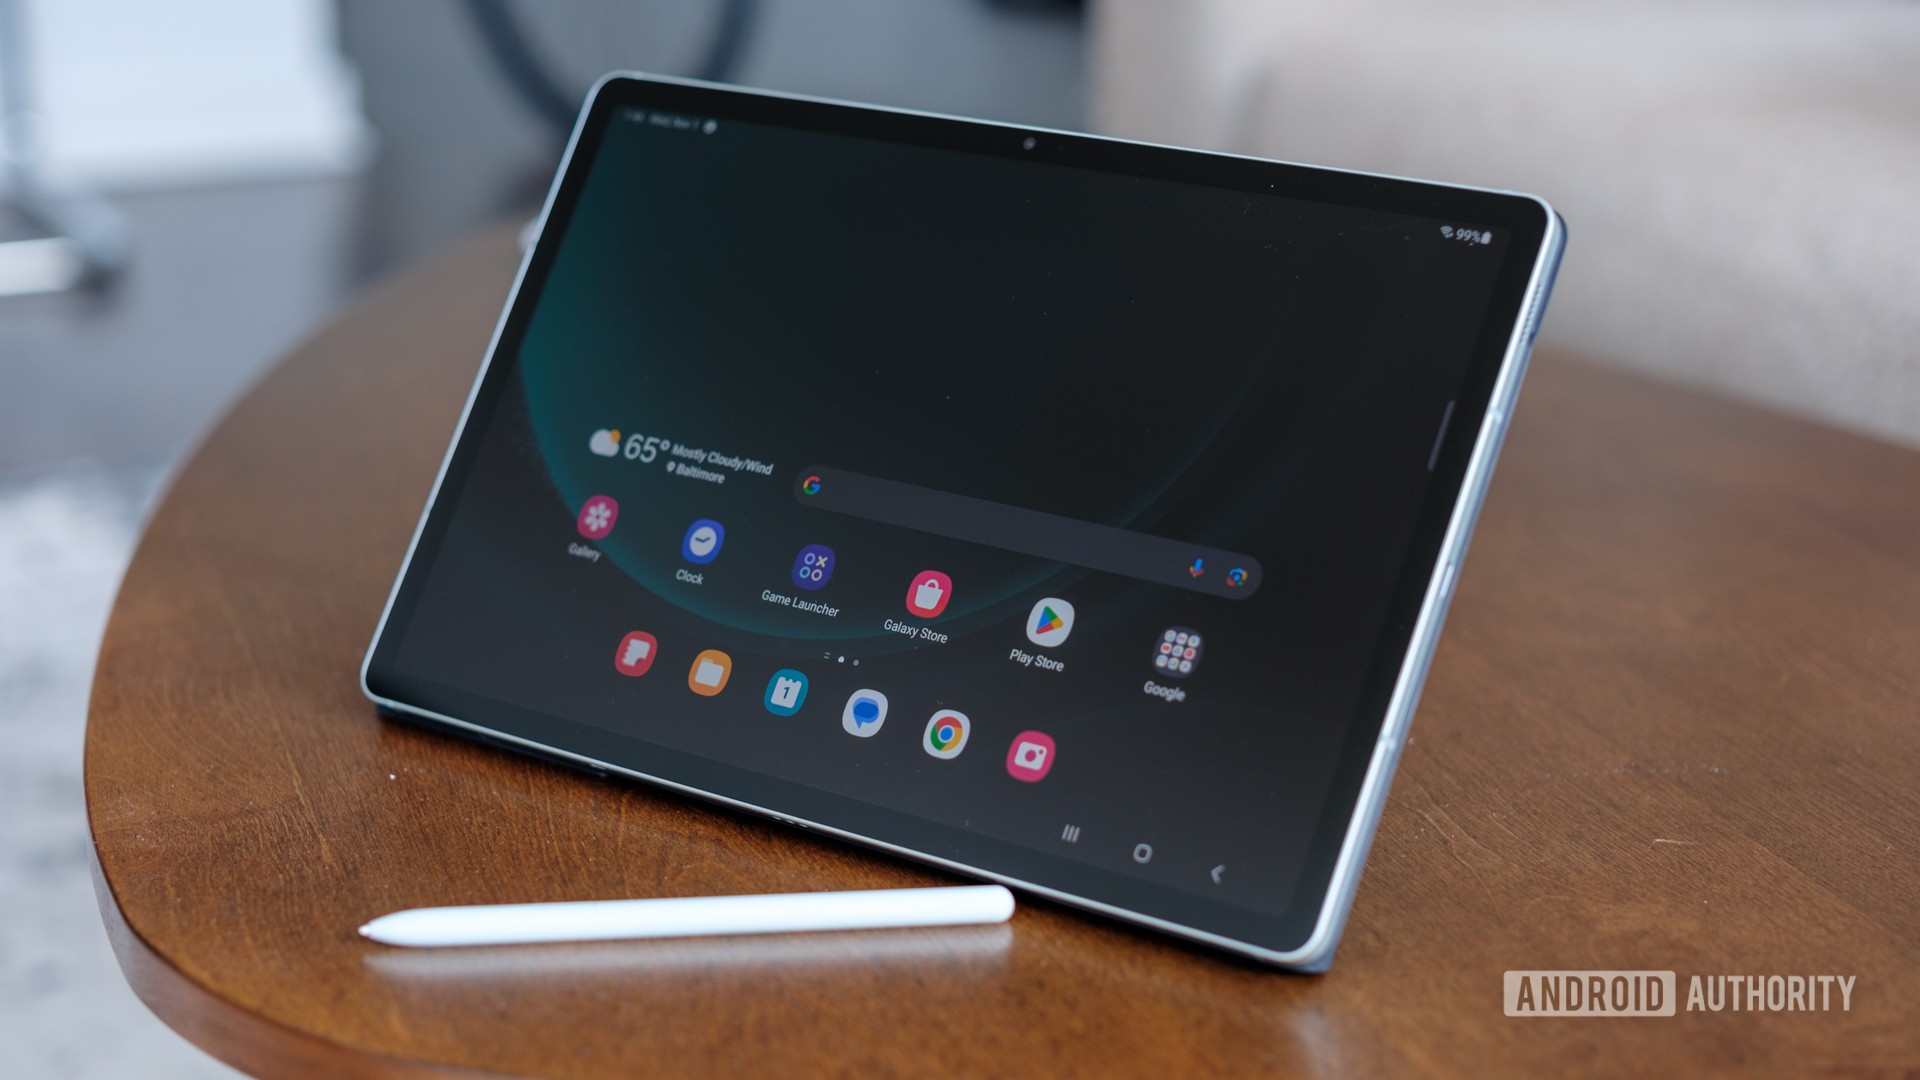 Samsung Galaxy Tab S9 Plus hands-on review: Come for the AMOLED